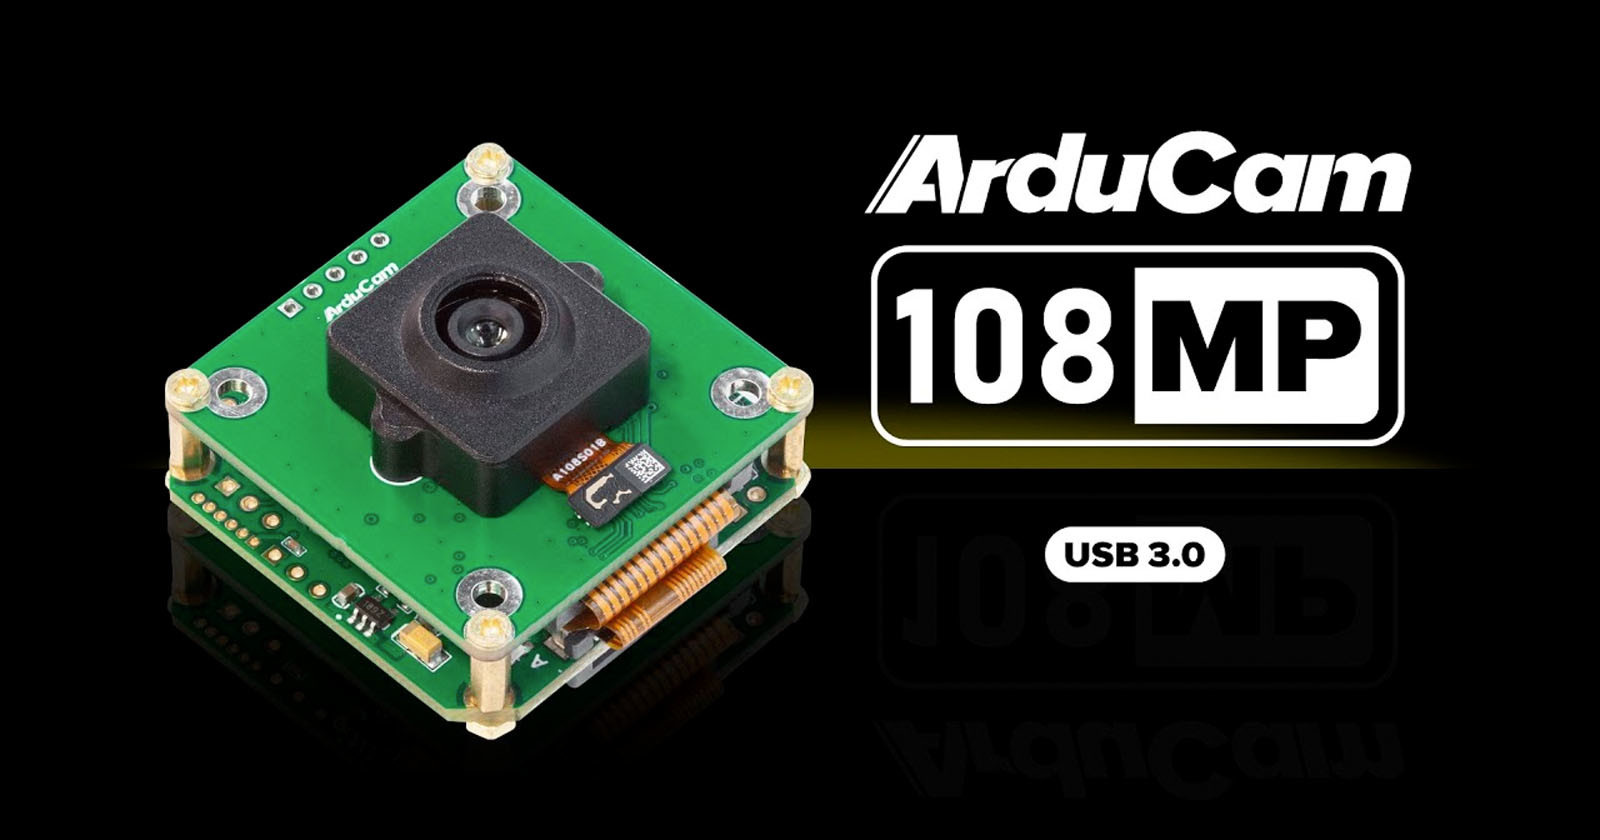 ArduCams 108MP USB Camera Brings Huge Resolution at a Low Price